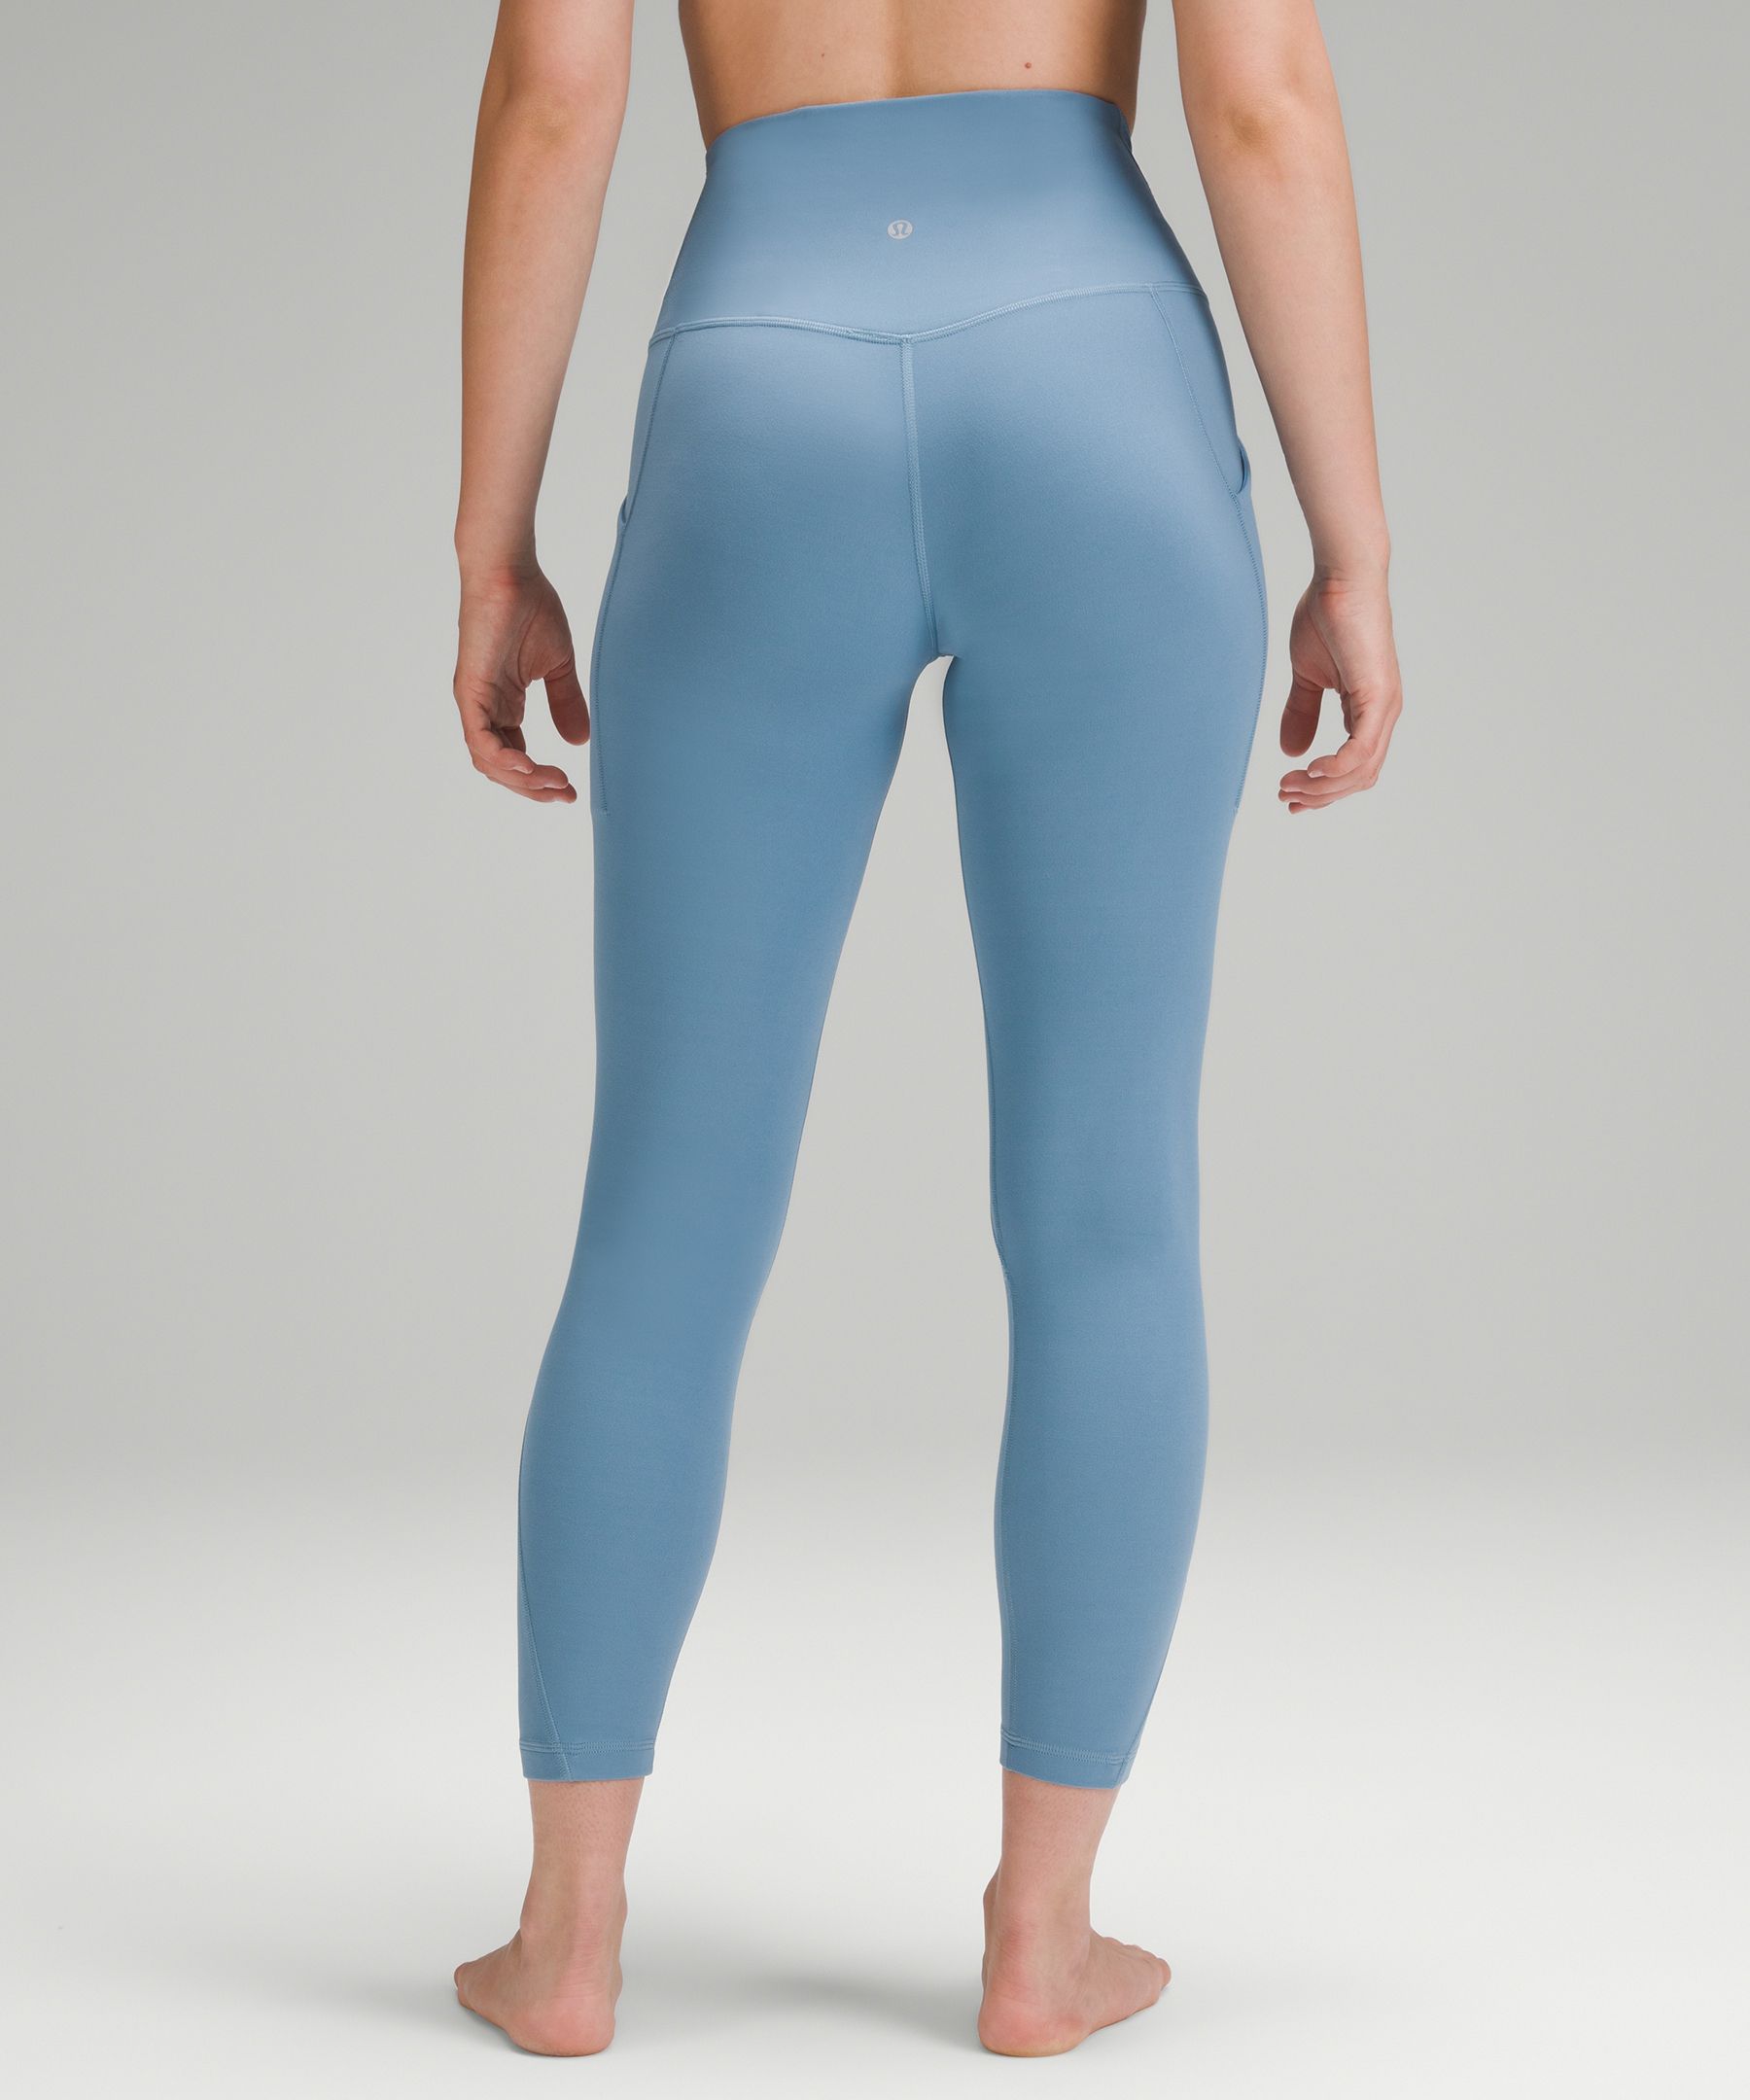 Lululemon Align™ High-Rise Pant with Pockets 25". 3